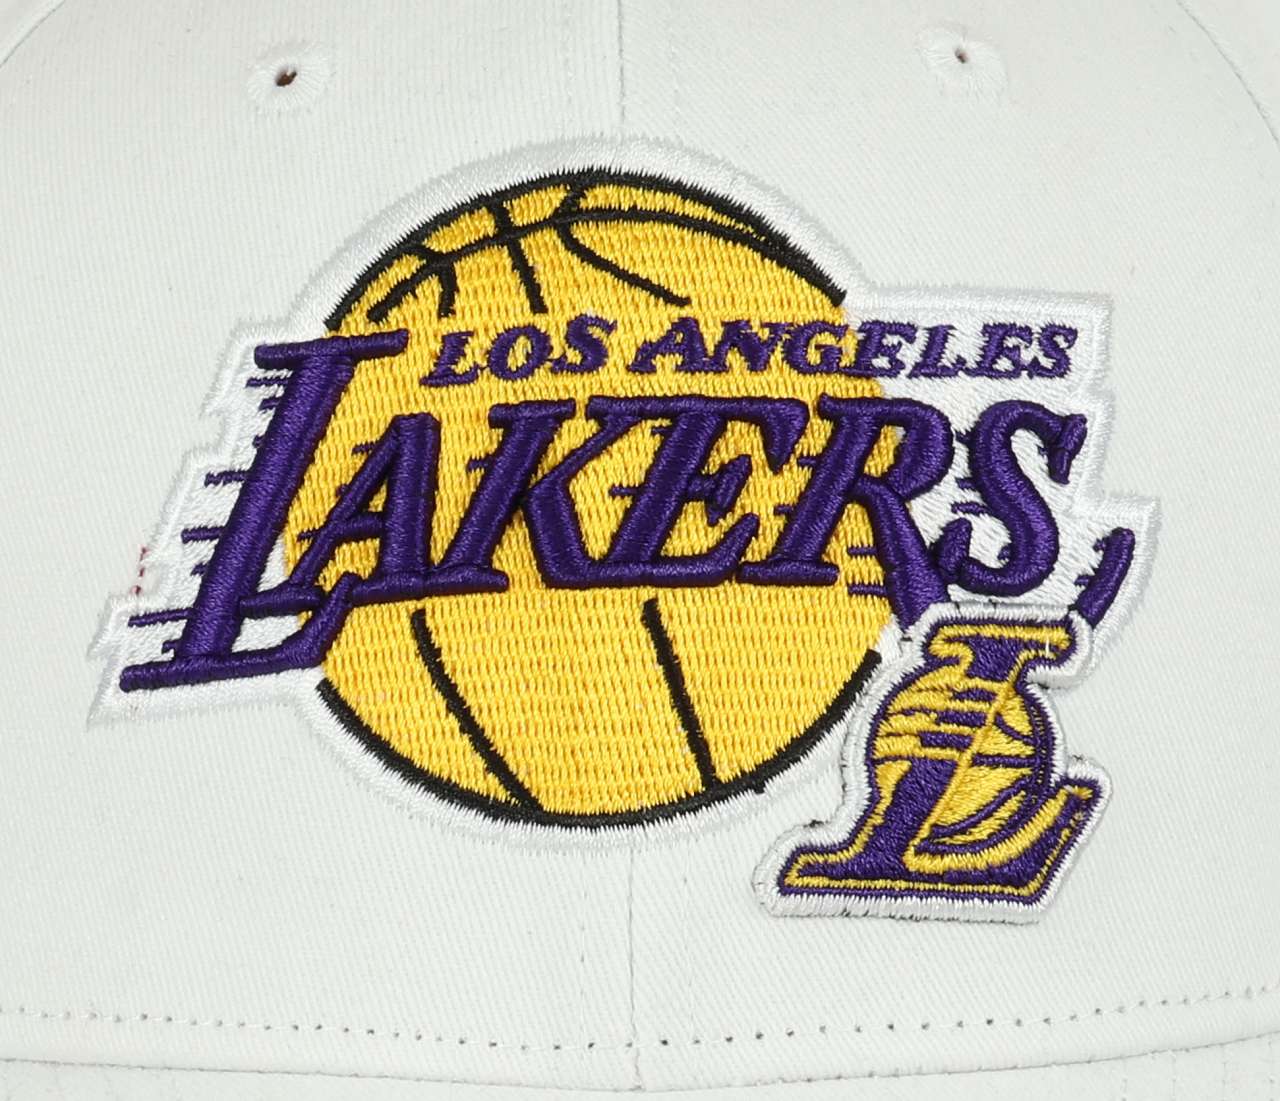 Los Angeles Lakers  NBA All In Pro Crown Fit White Snapback Cap Mitchell & Ness